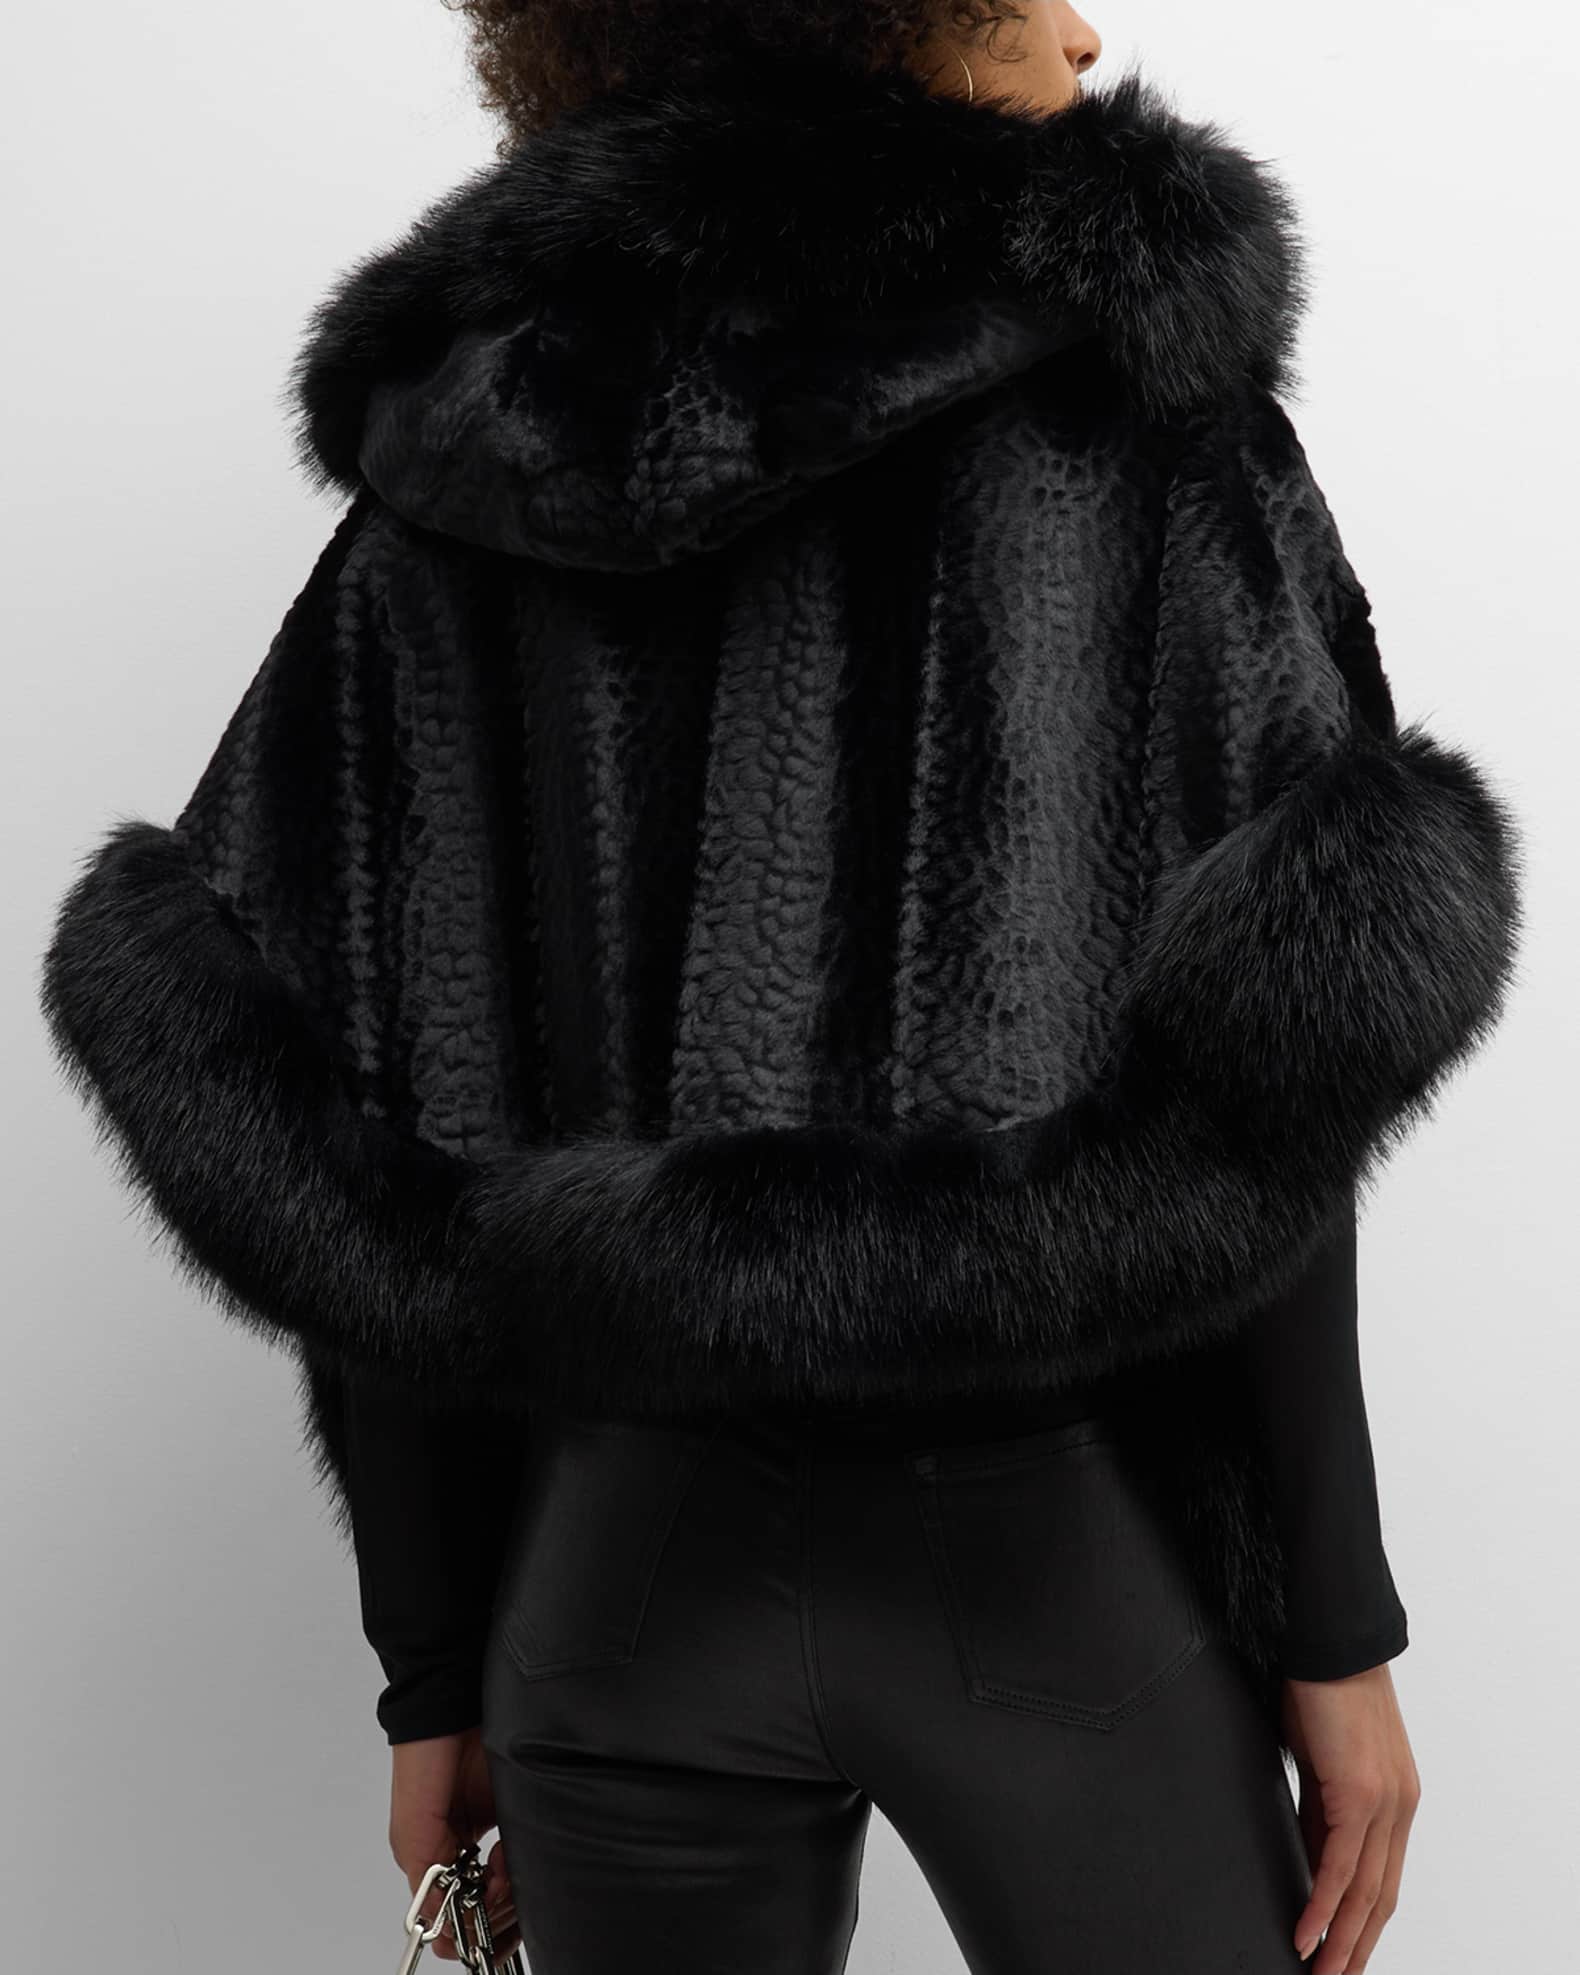 Kelli Kouri Hooded Faux Fur Poncho with Leather Strings | Neiman Marcus